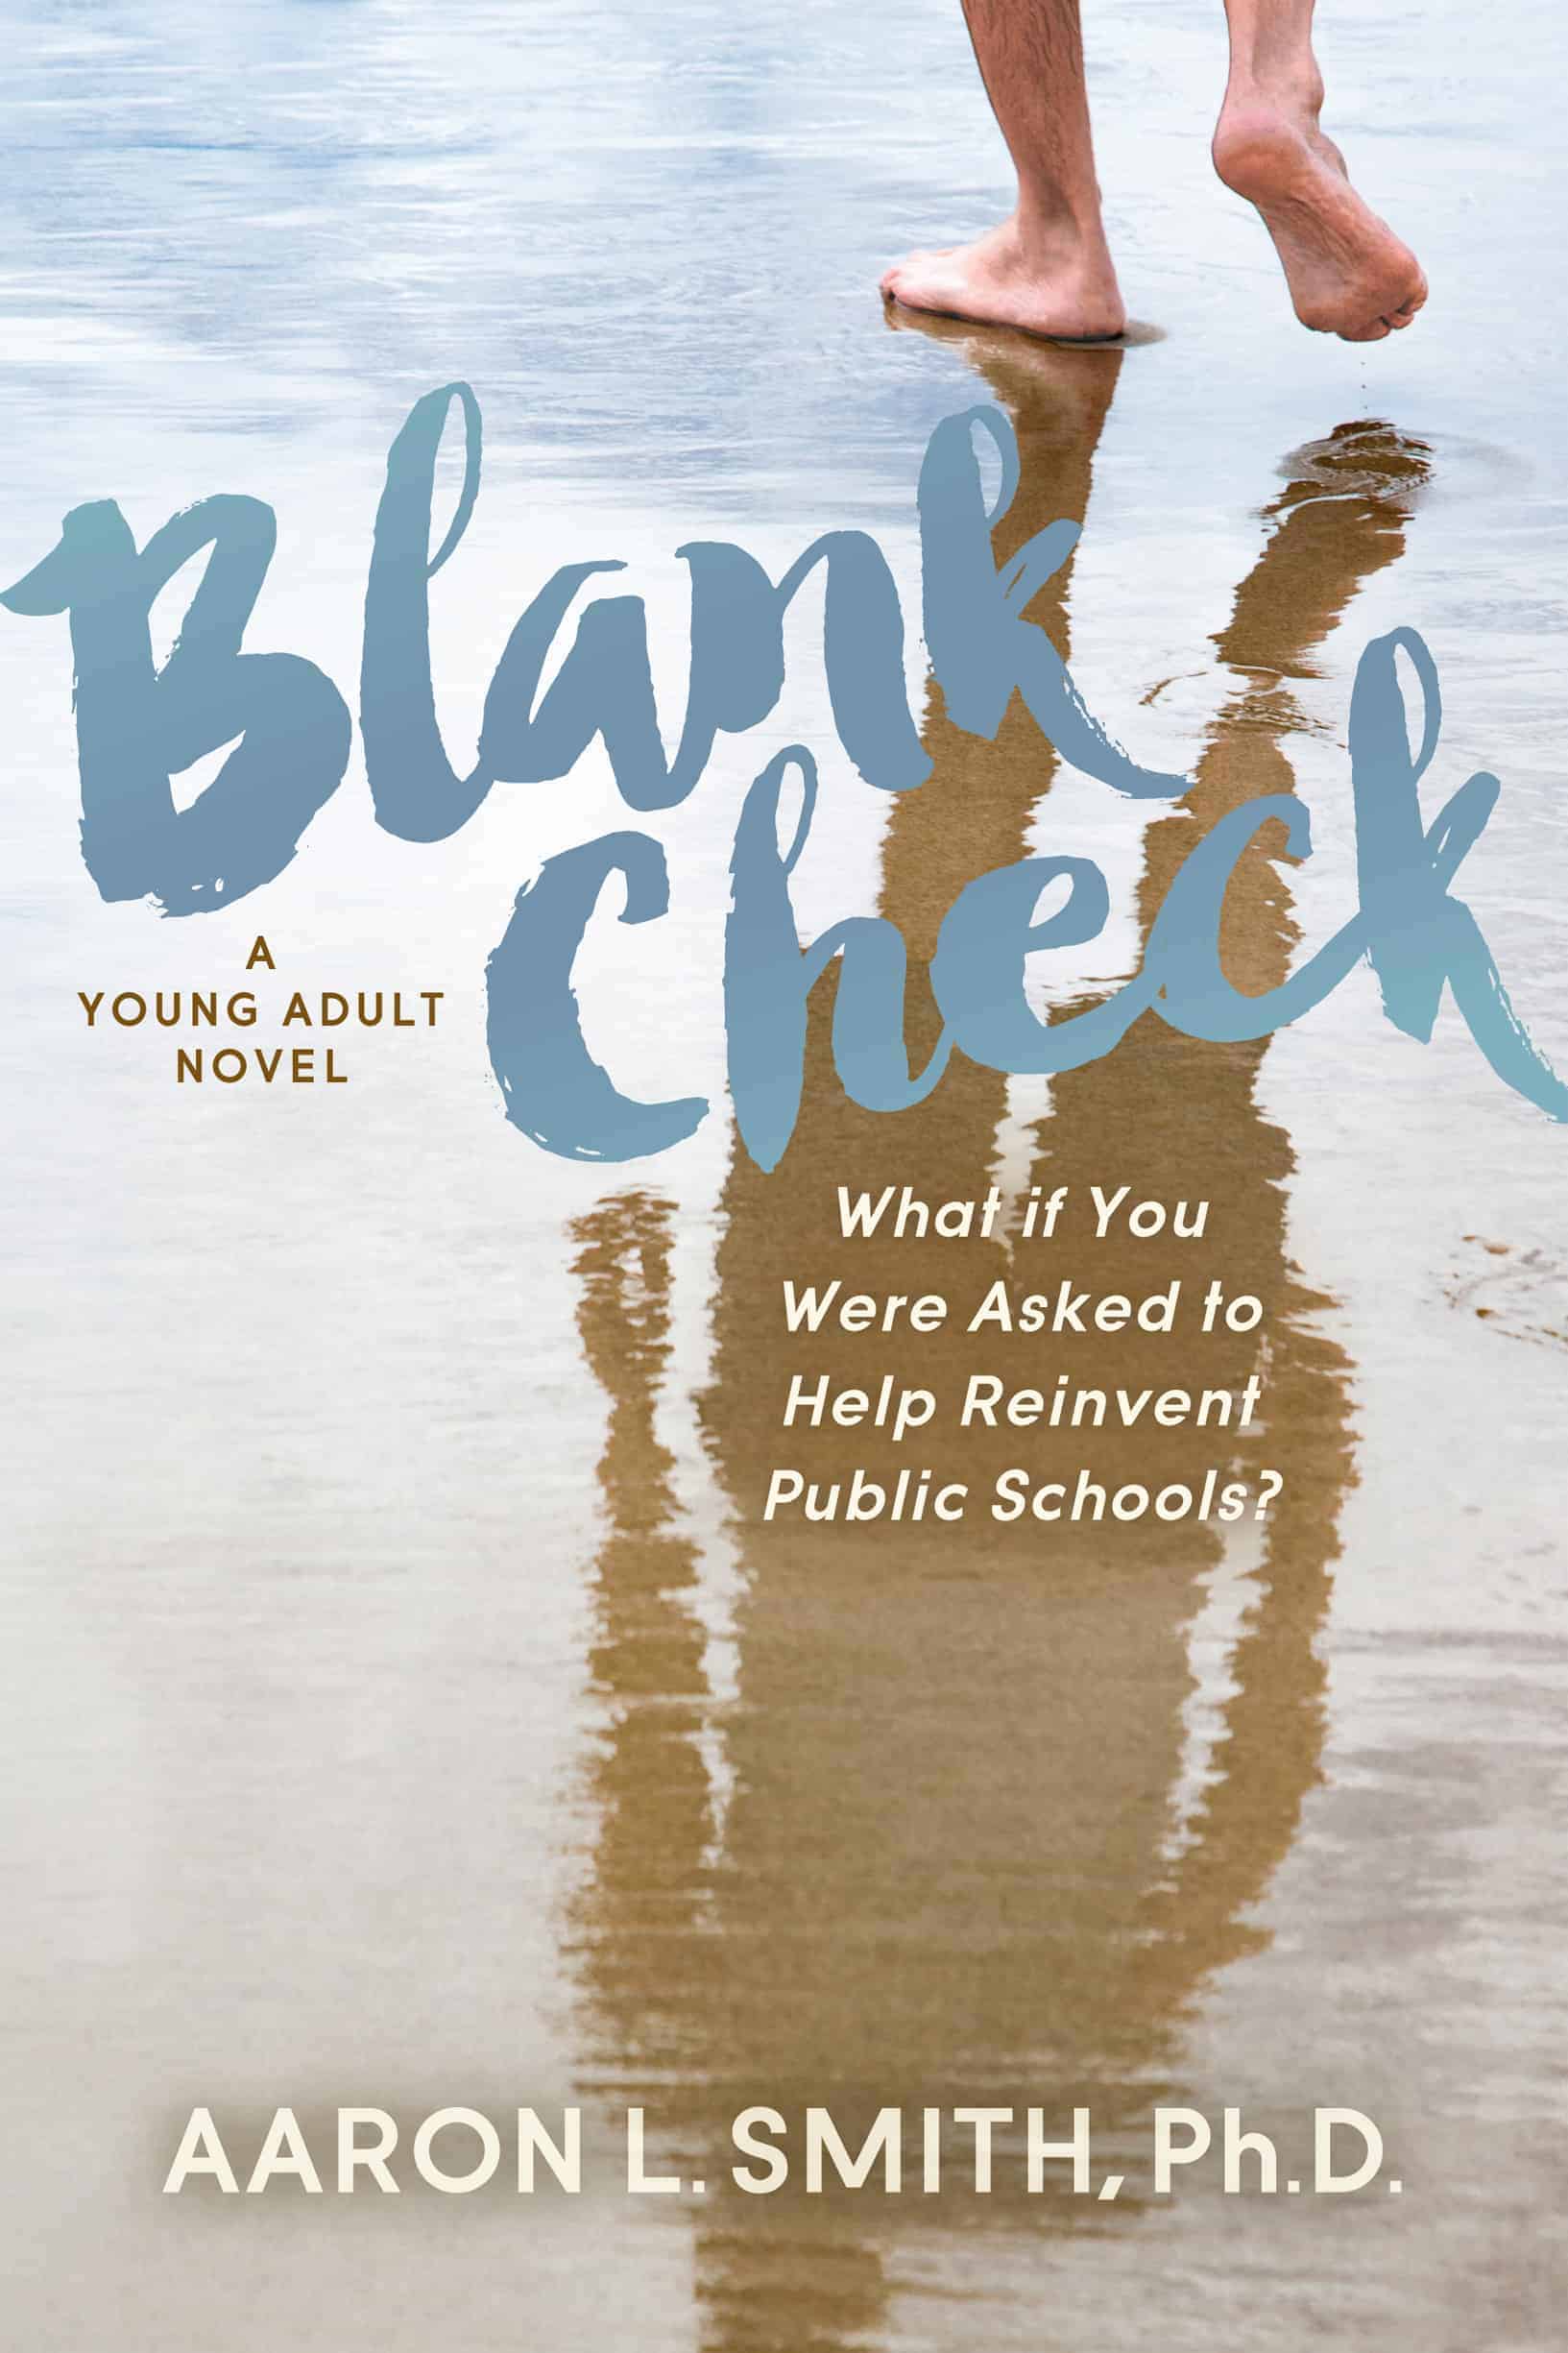 Blank Check is Aaron L Smith 's new book.